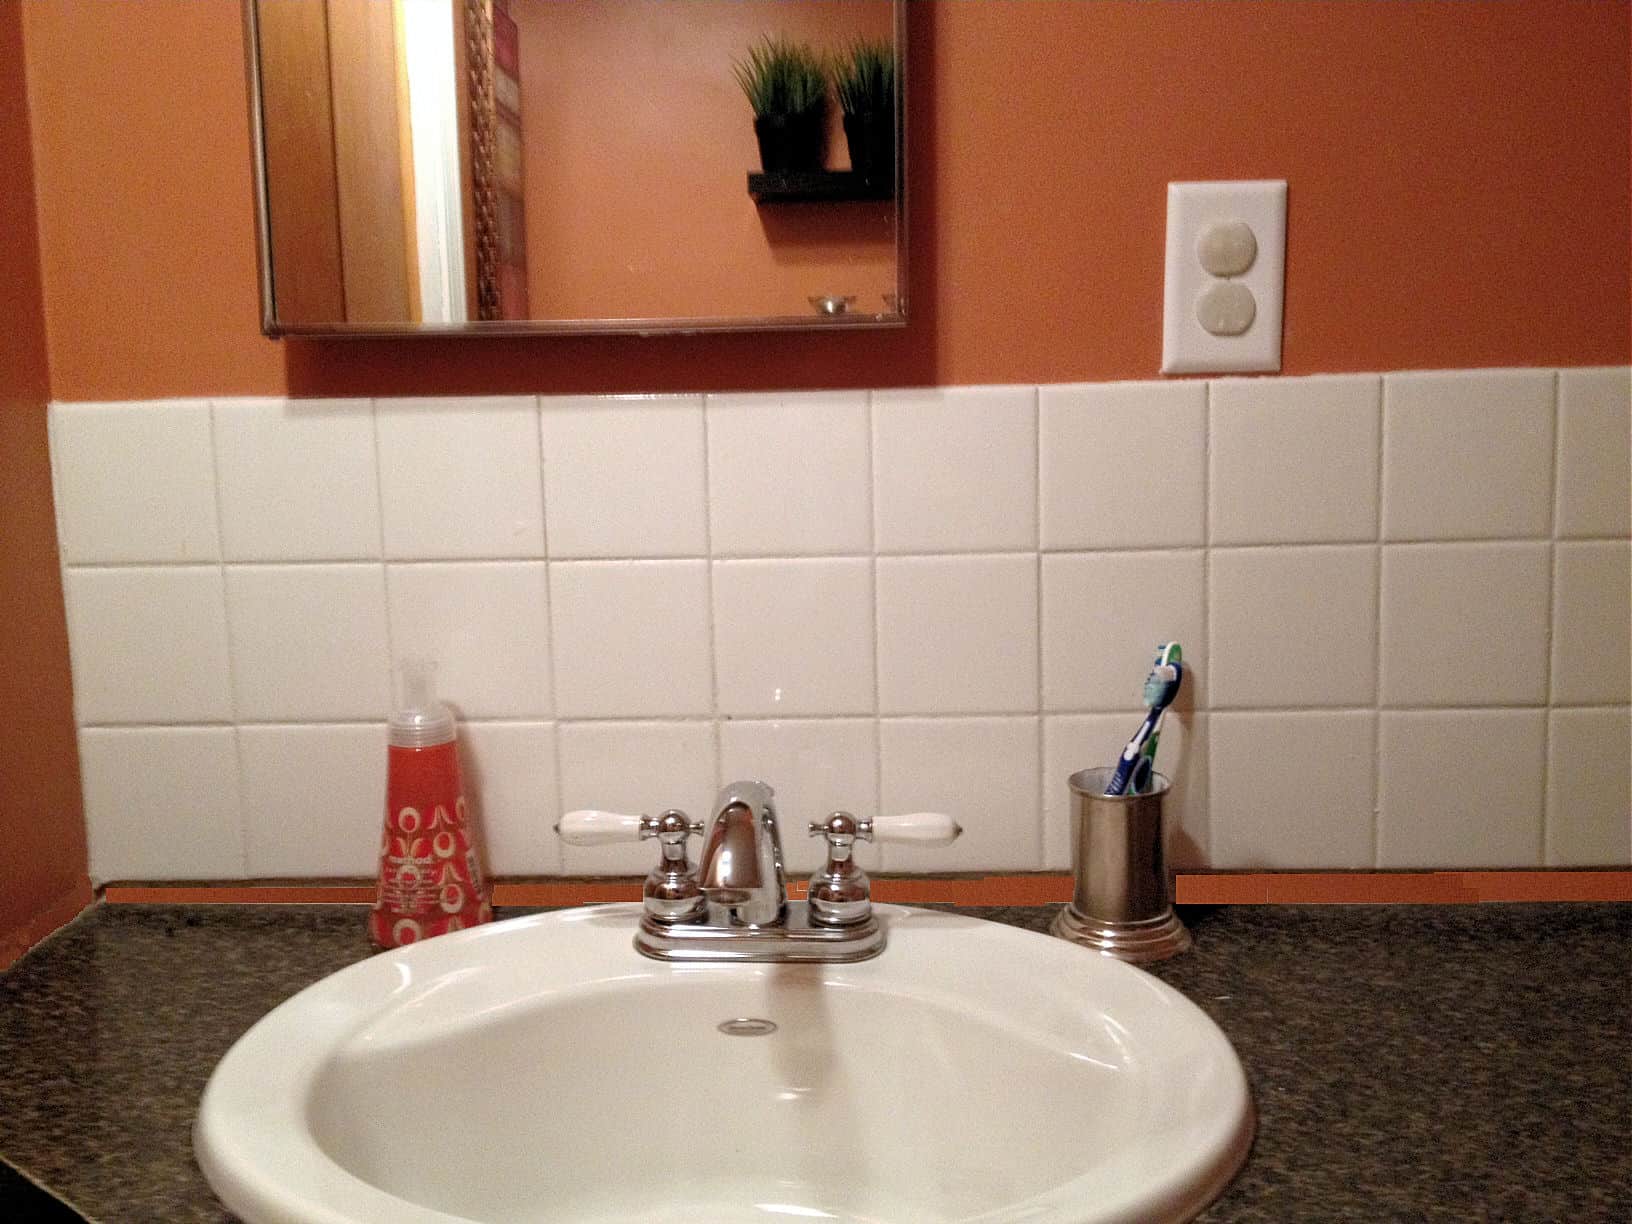 A round, white sink on dark countertop, with old-fashioned, square, white tiles above and a recessed medicine cabinet